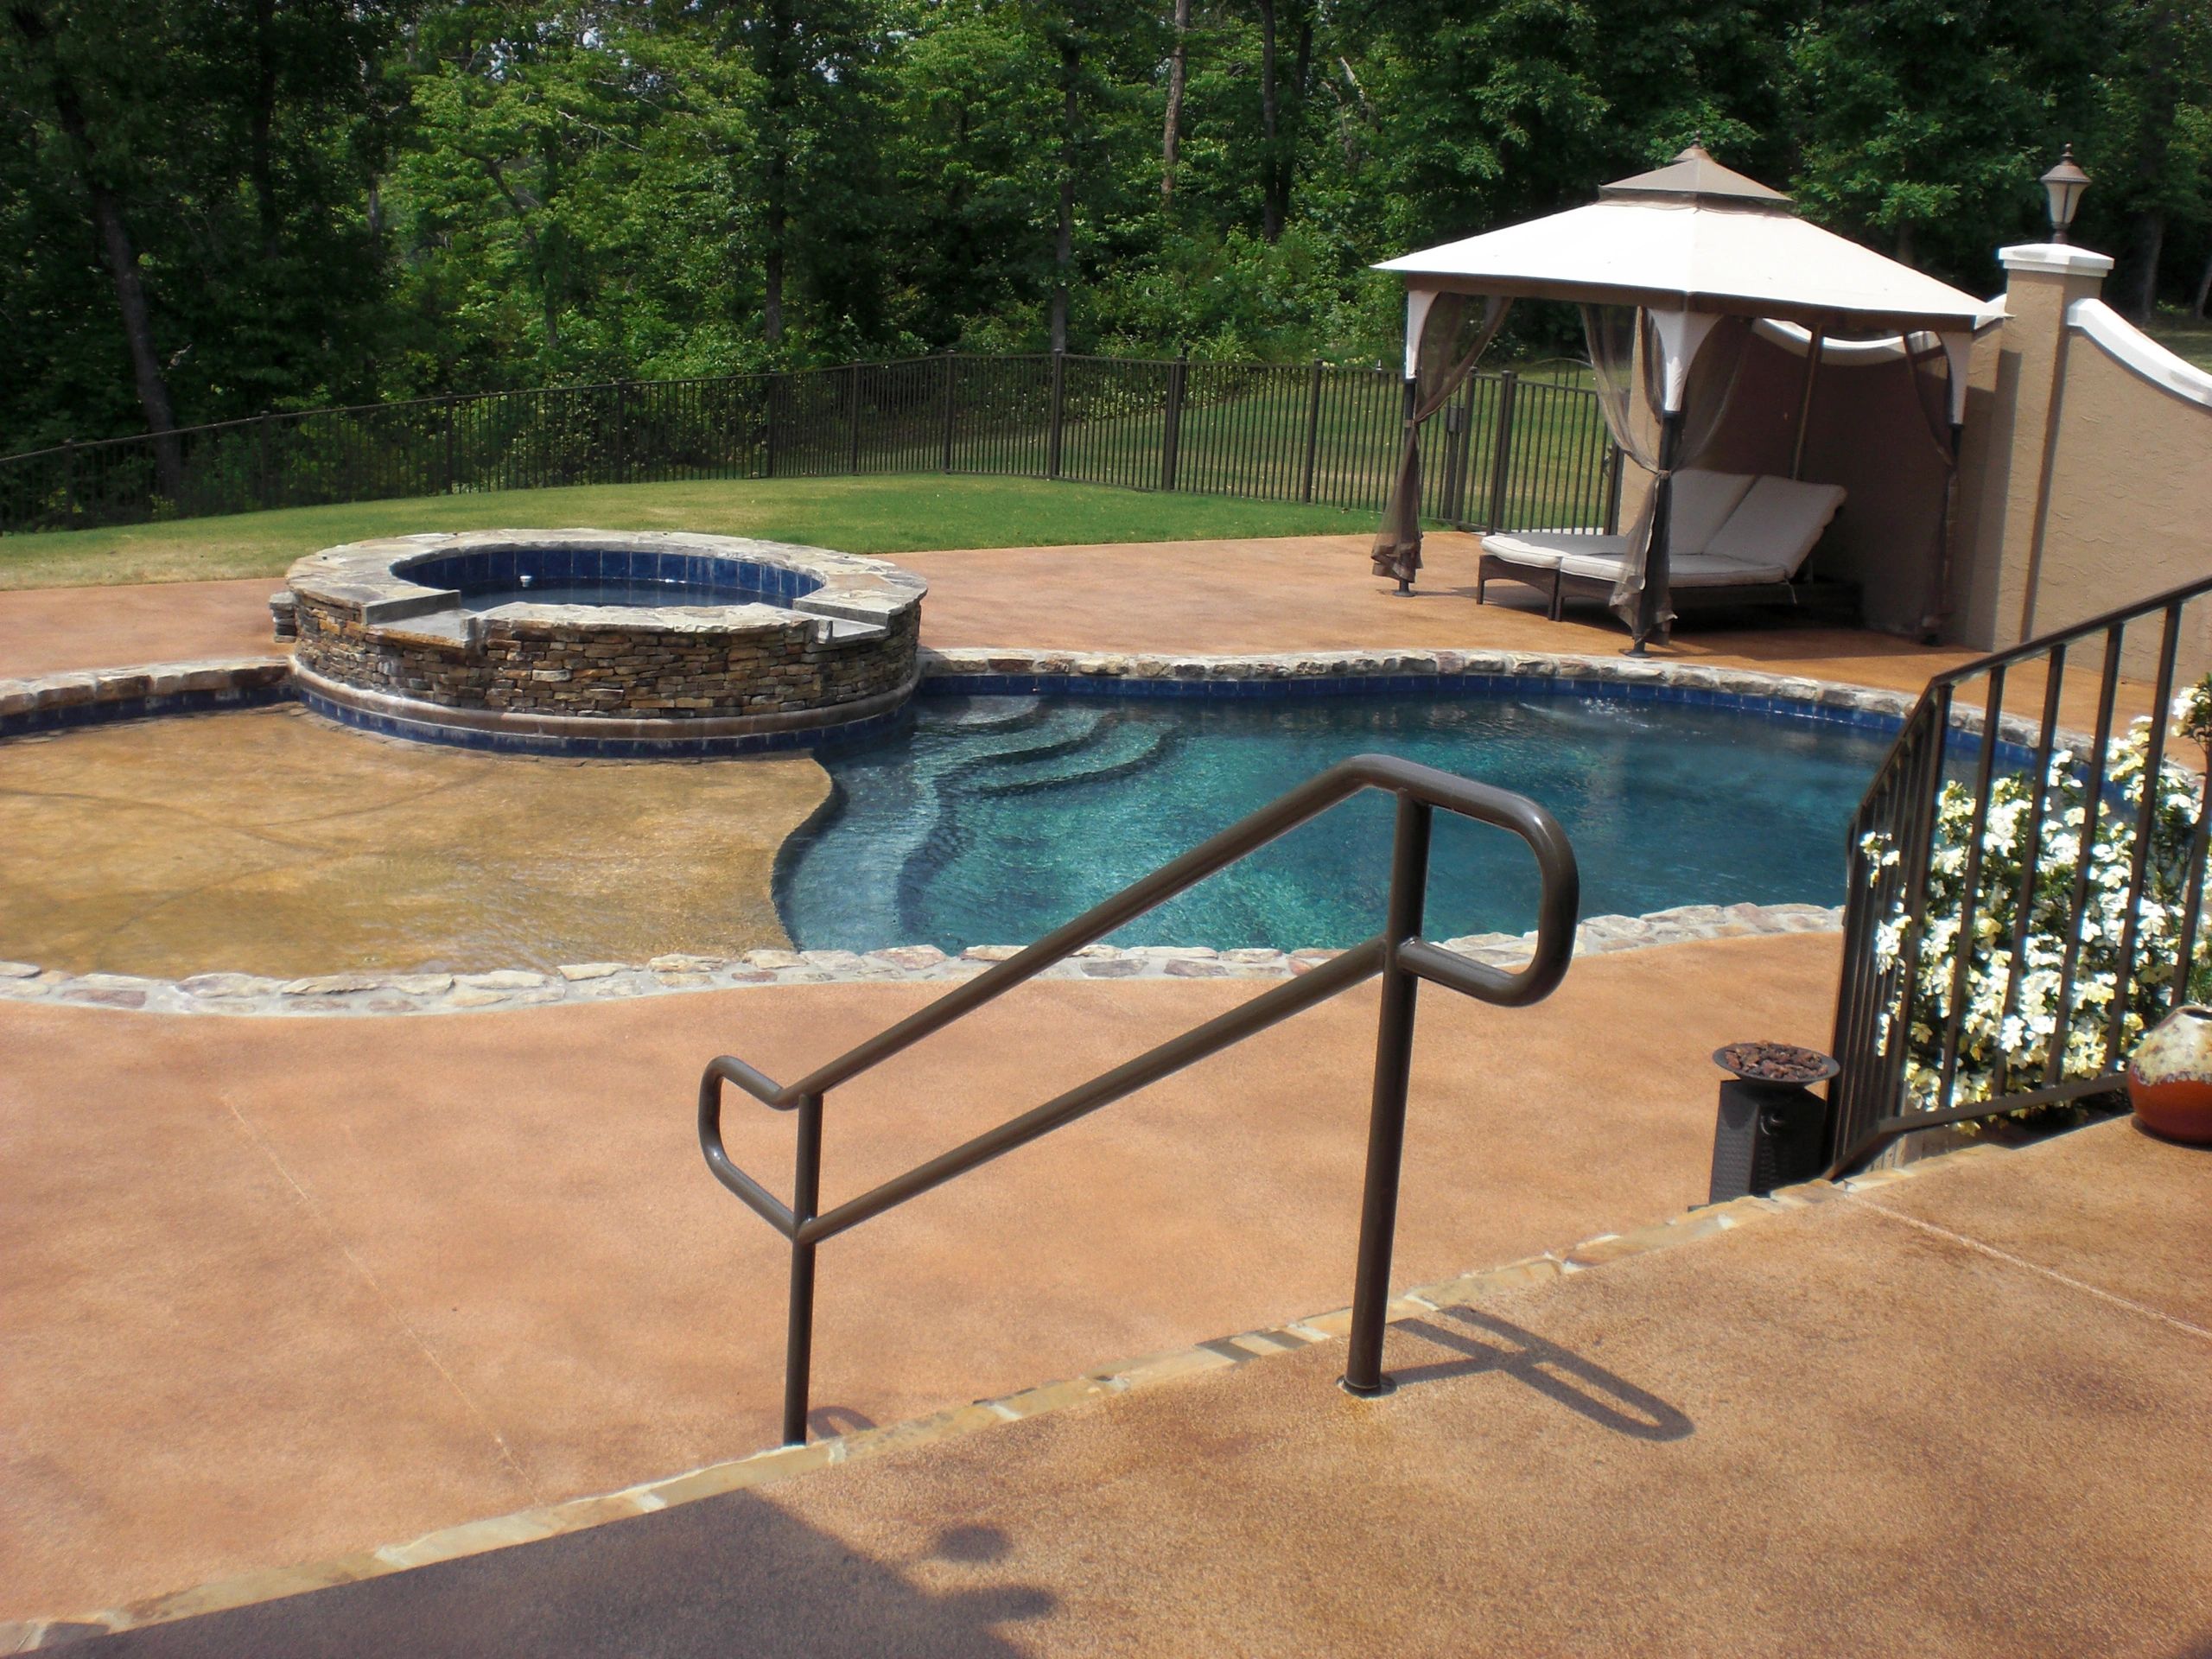 Pool Deck with distressed decorative concrete finish.